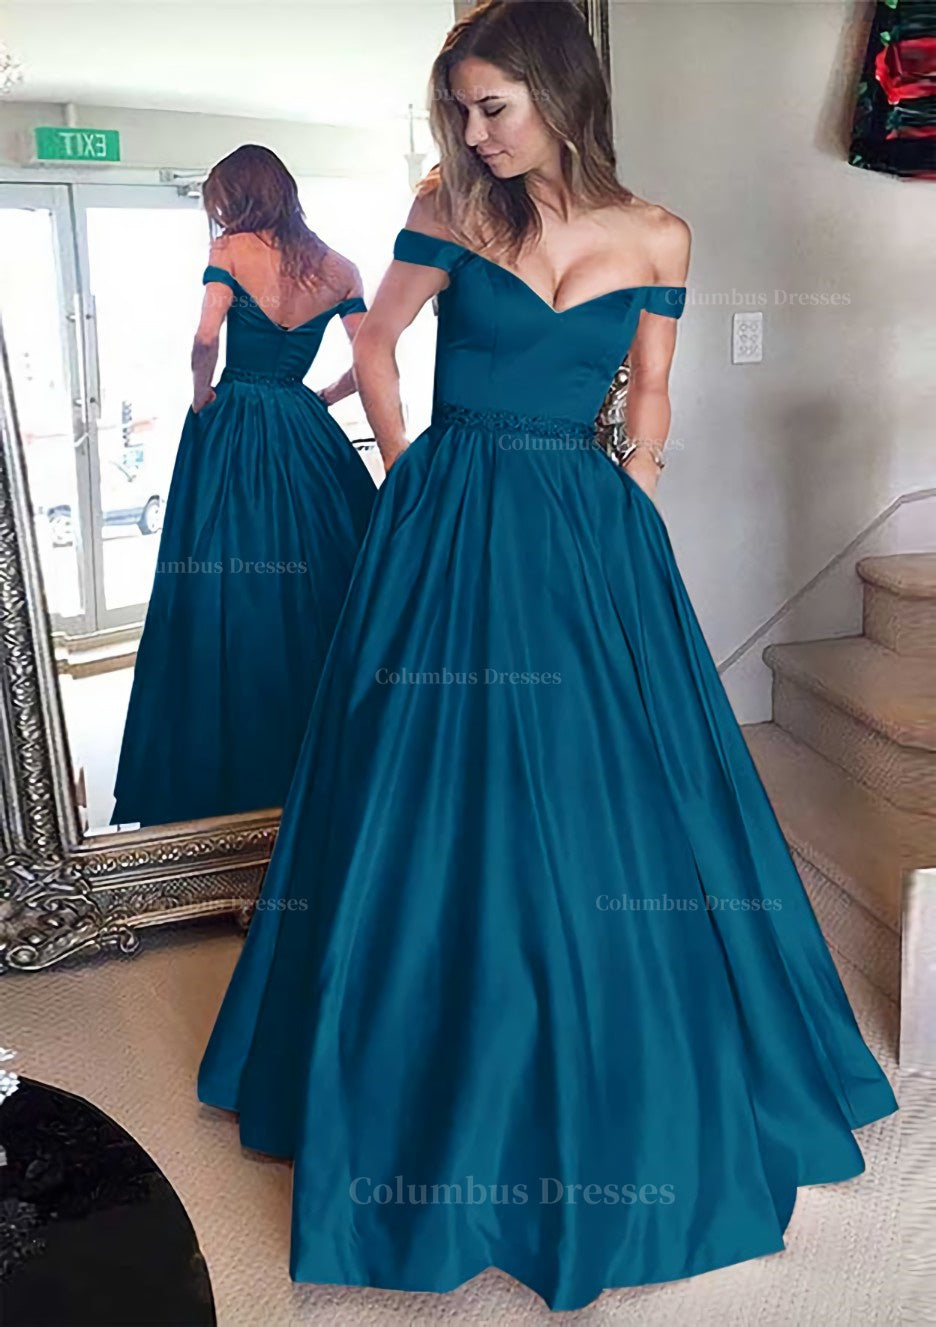 Bridesmaid Dresses White, Satin Prom Dress A-Line/Princess Off-The-Shoulder Long/Floor-Length With Beaded